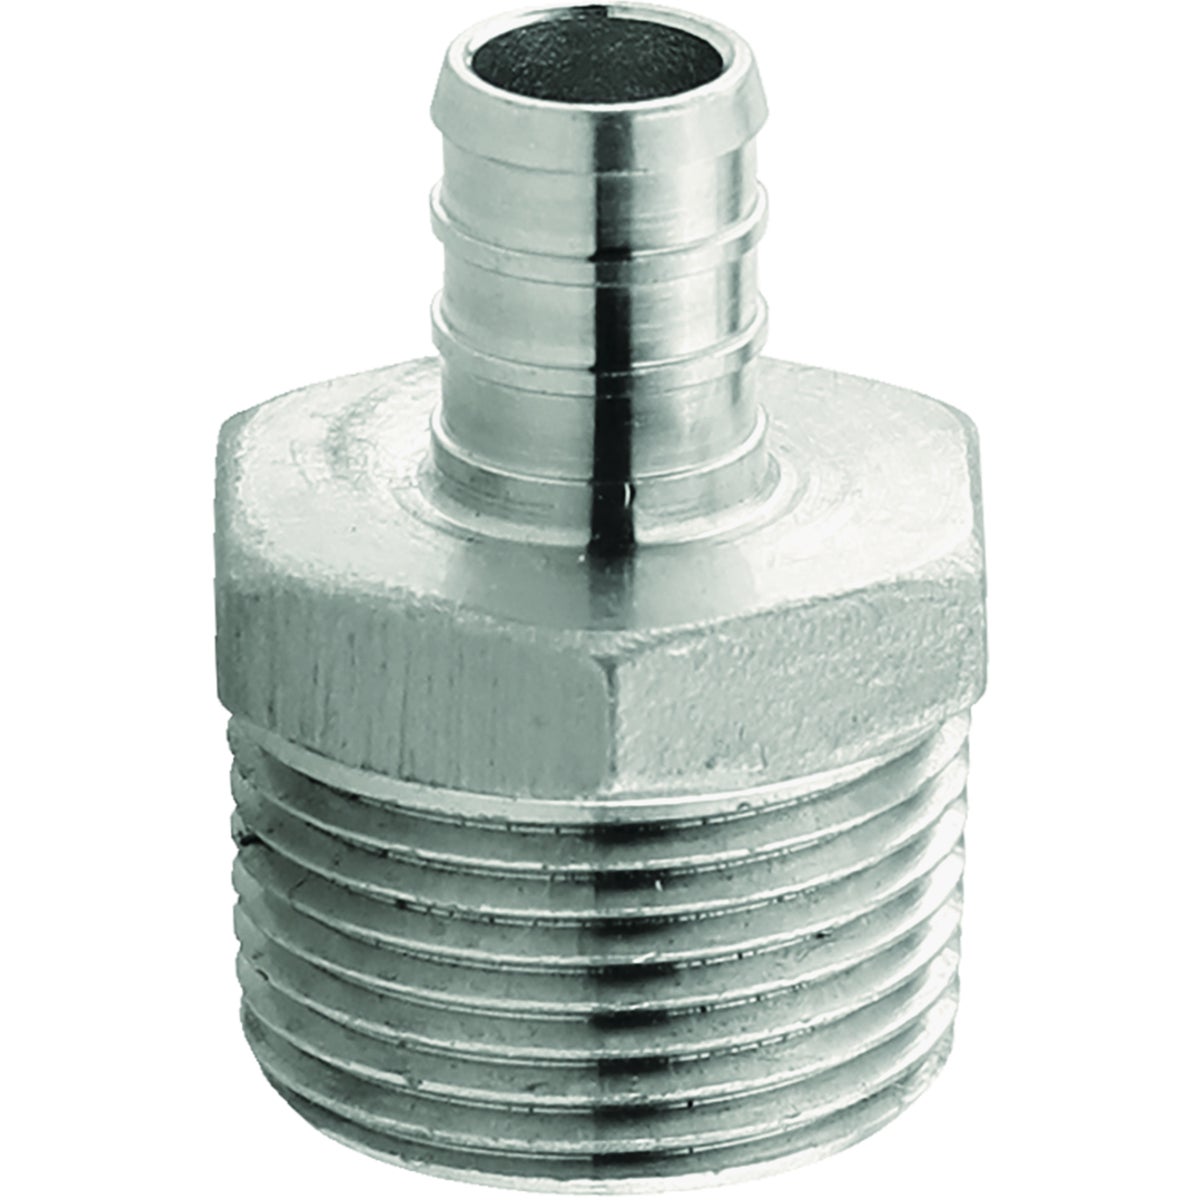 Plumbeez 1/2 In. x 3/4 In. MPT Stainless Steel PEX Adapter